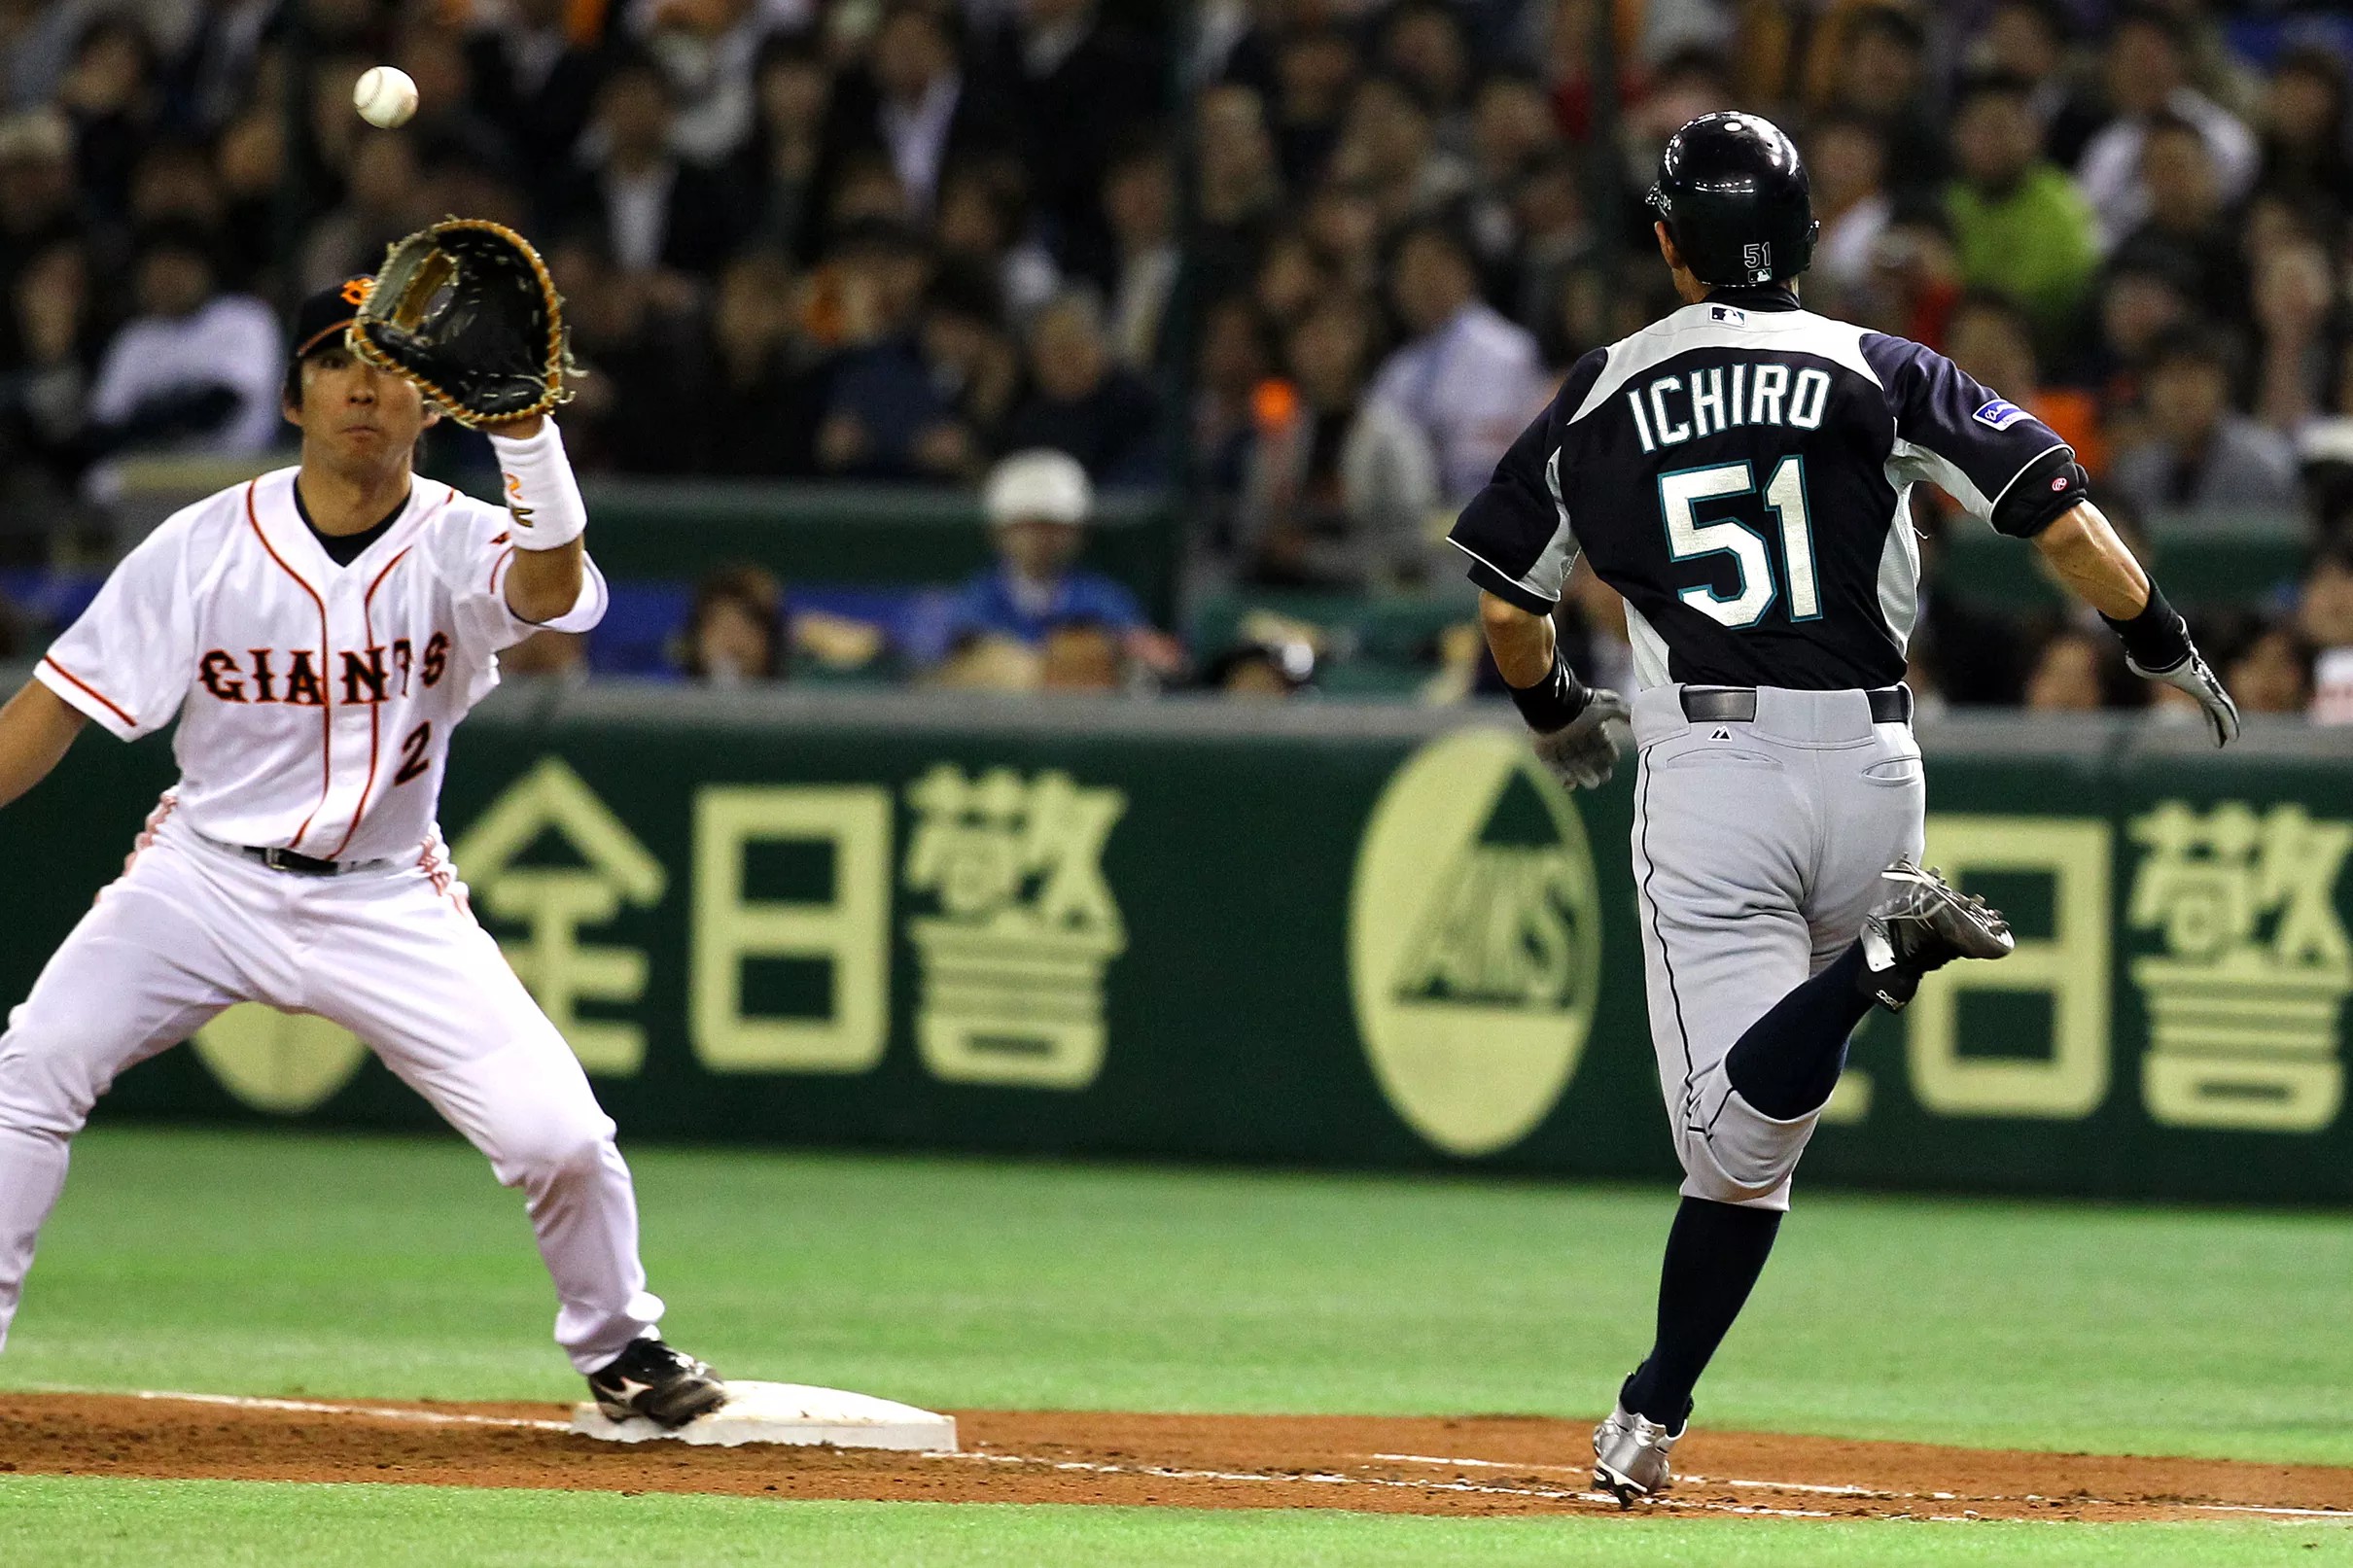 Get to know the Yomiuri Giants